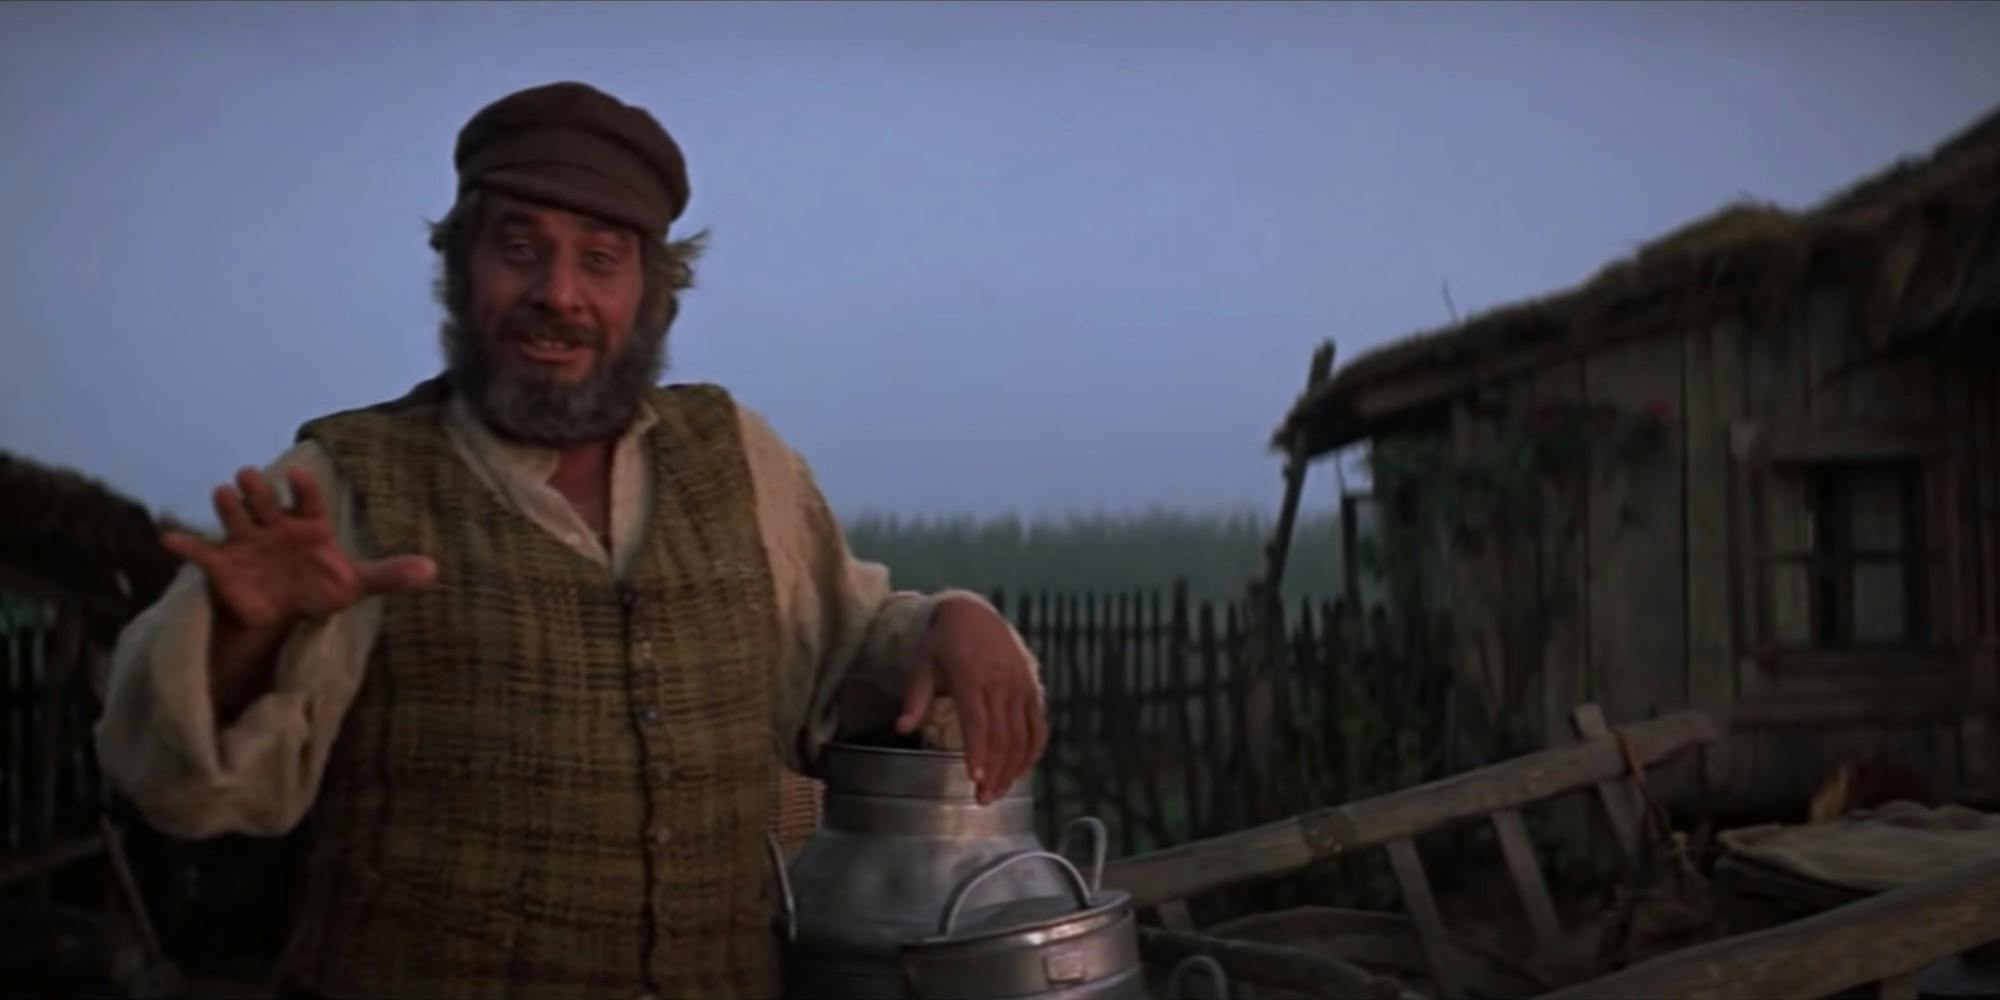 A still from the movie Fiddler on the Roof, which follows a Jewish man in a small Ukrainian village called Anatevka in 1905.